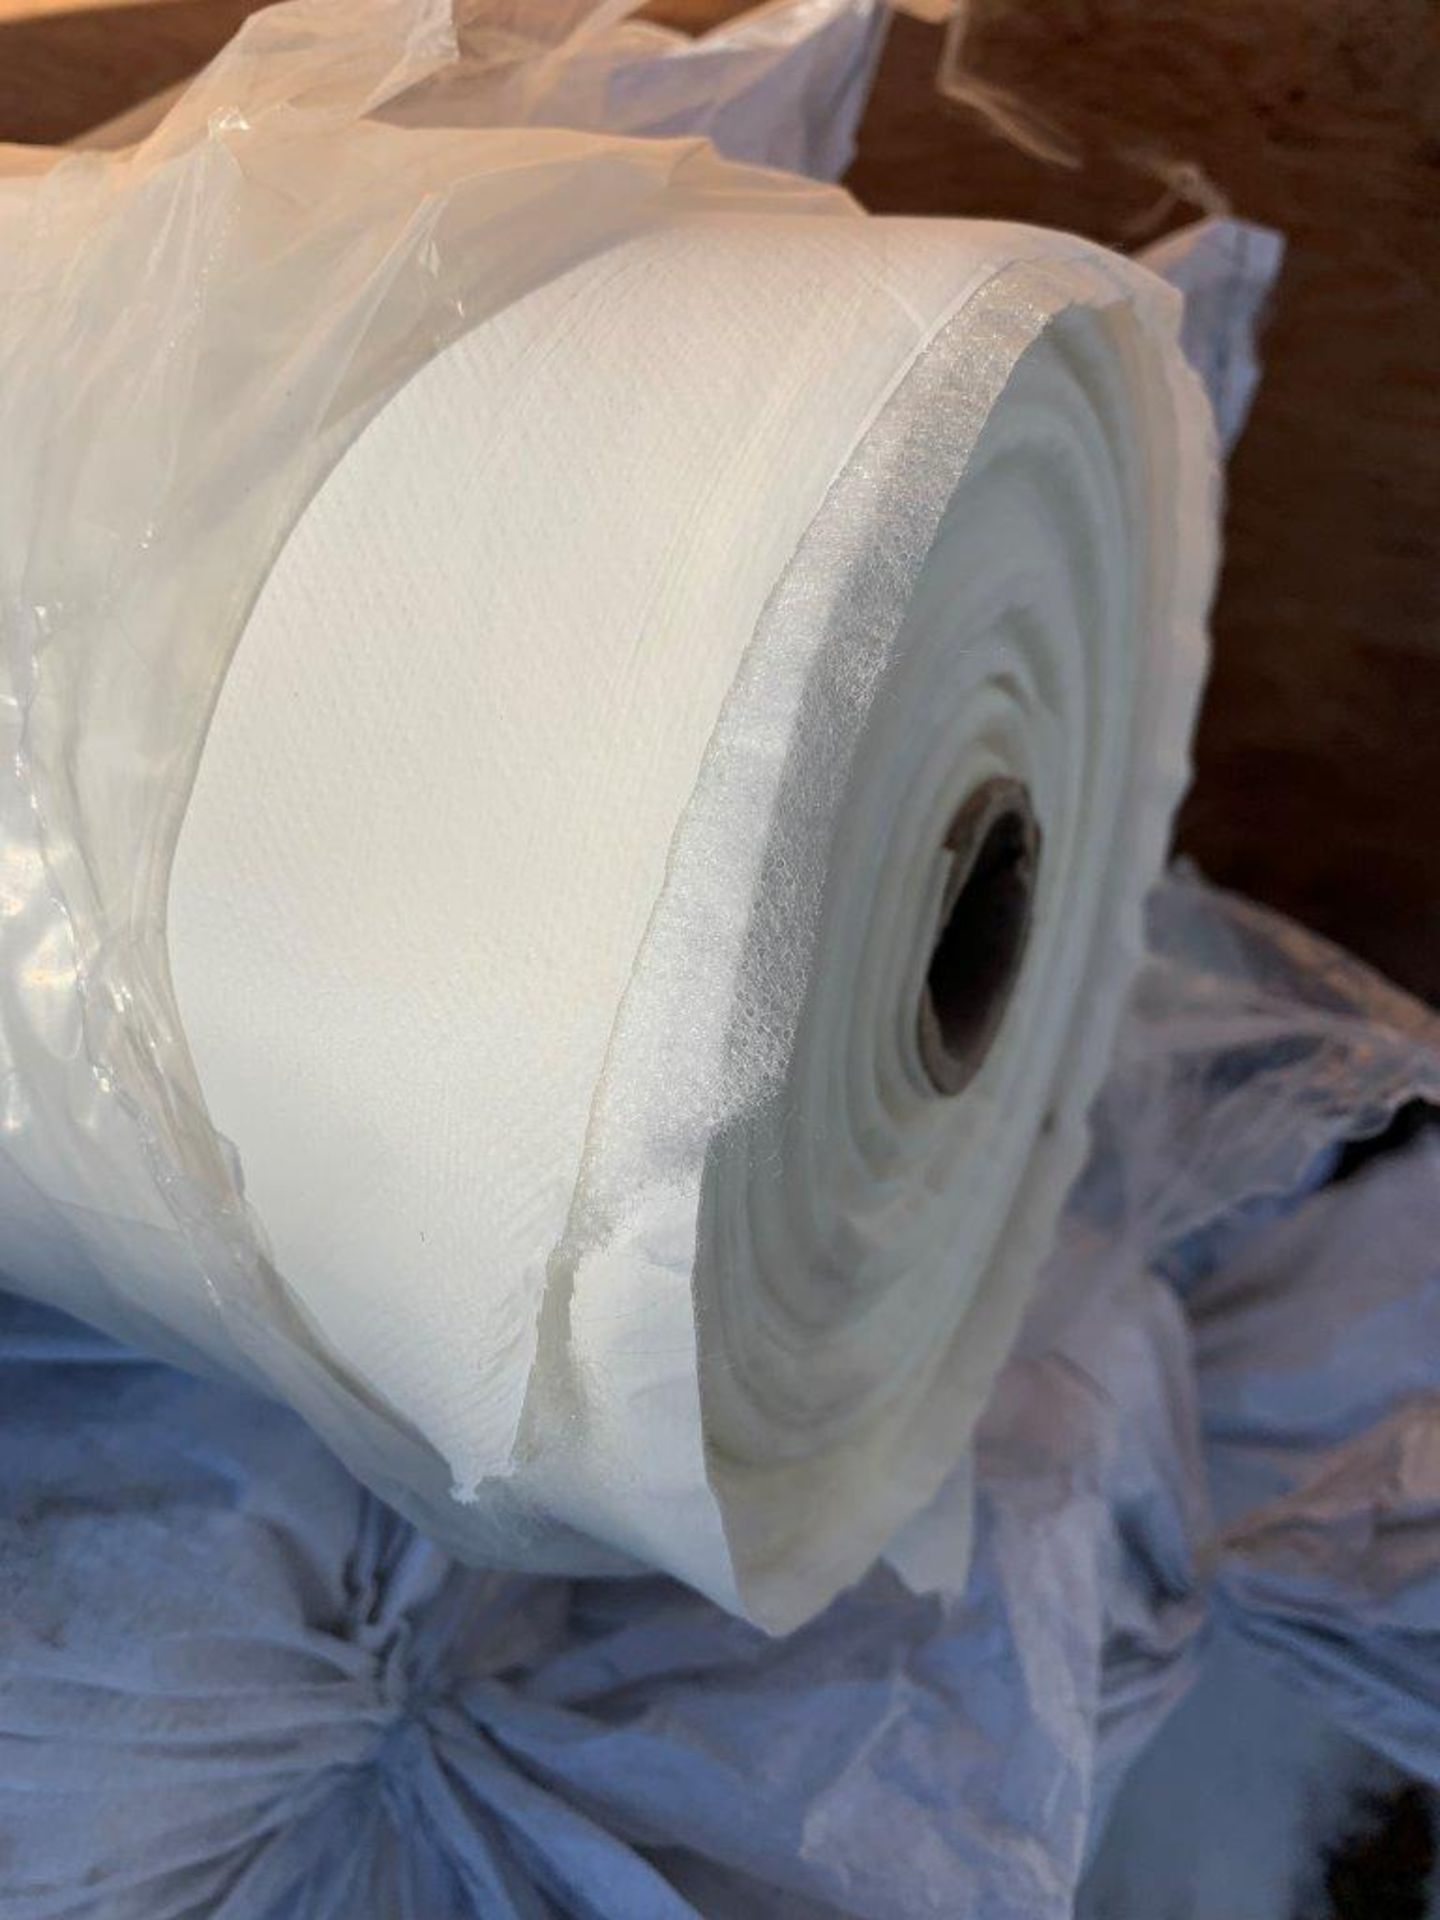 10-ROLLS NON-WOVEN FABRIC 1.55M X 100M (TIMES THE MONEY X 10) - Image 2 of 4